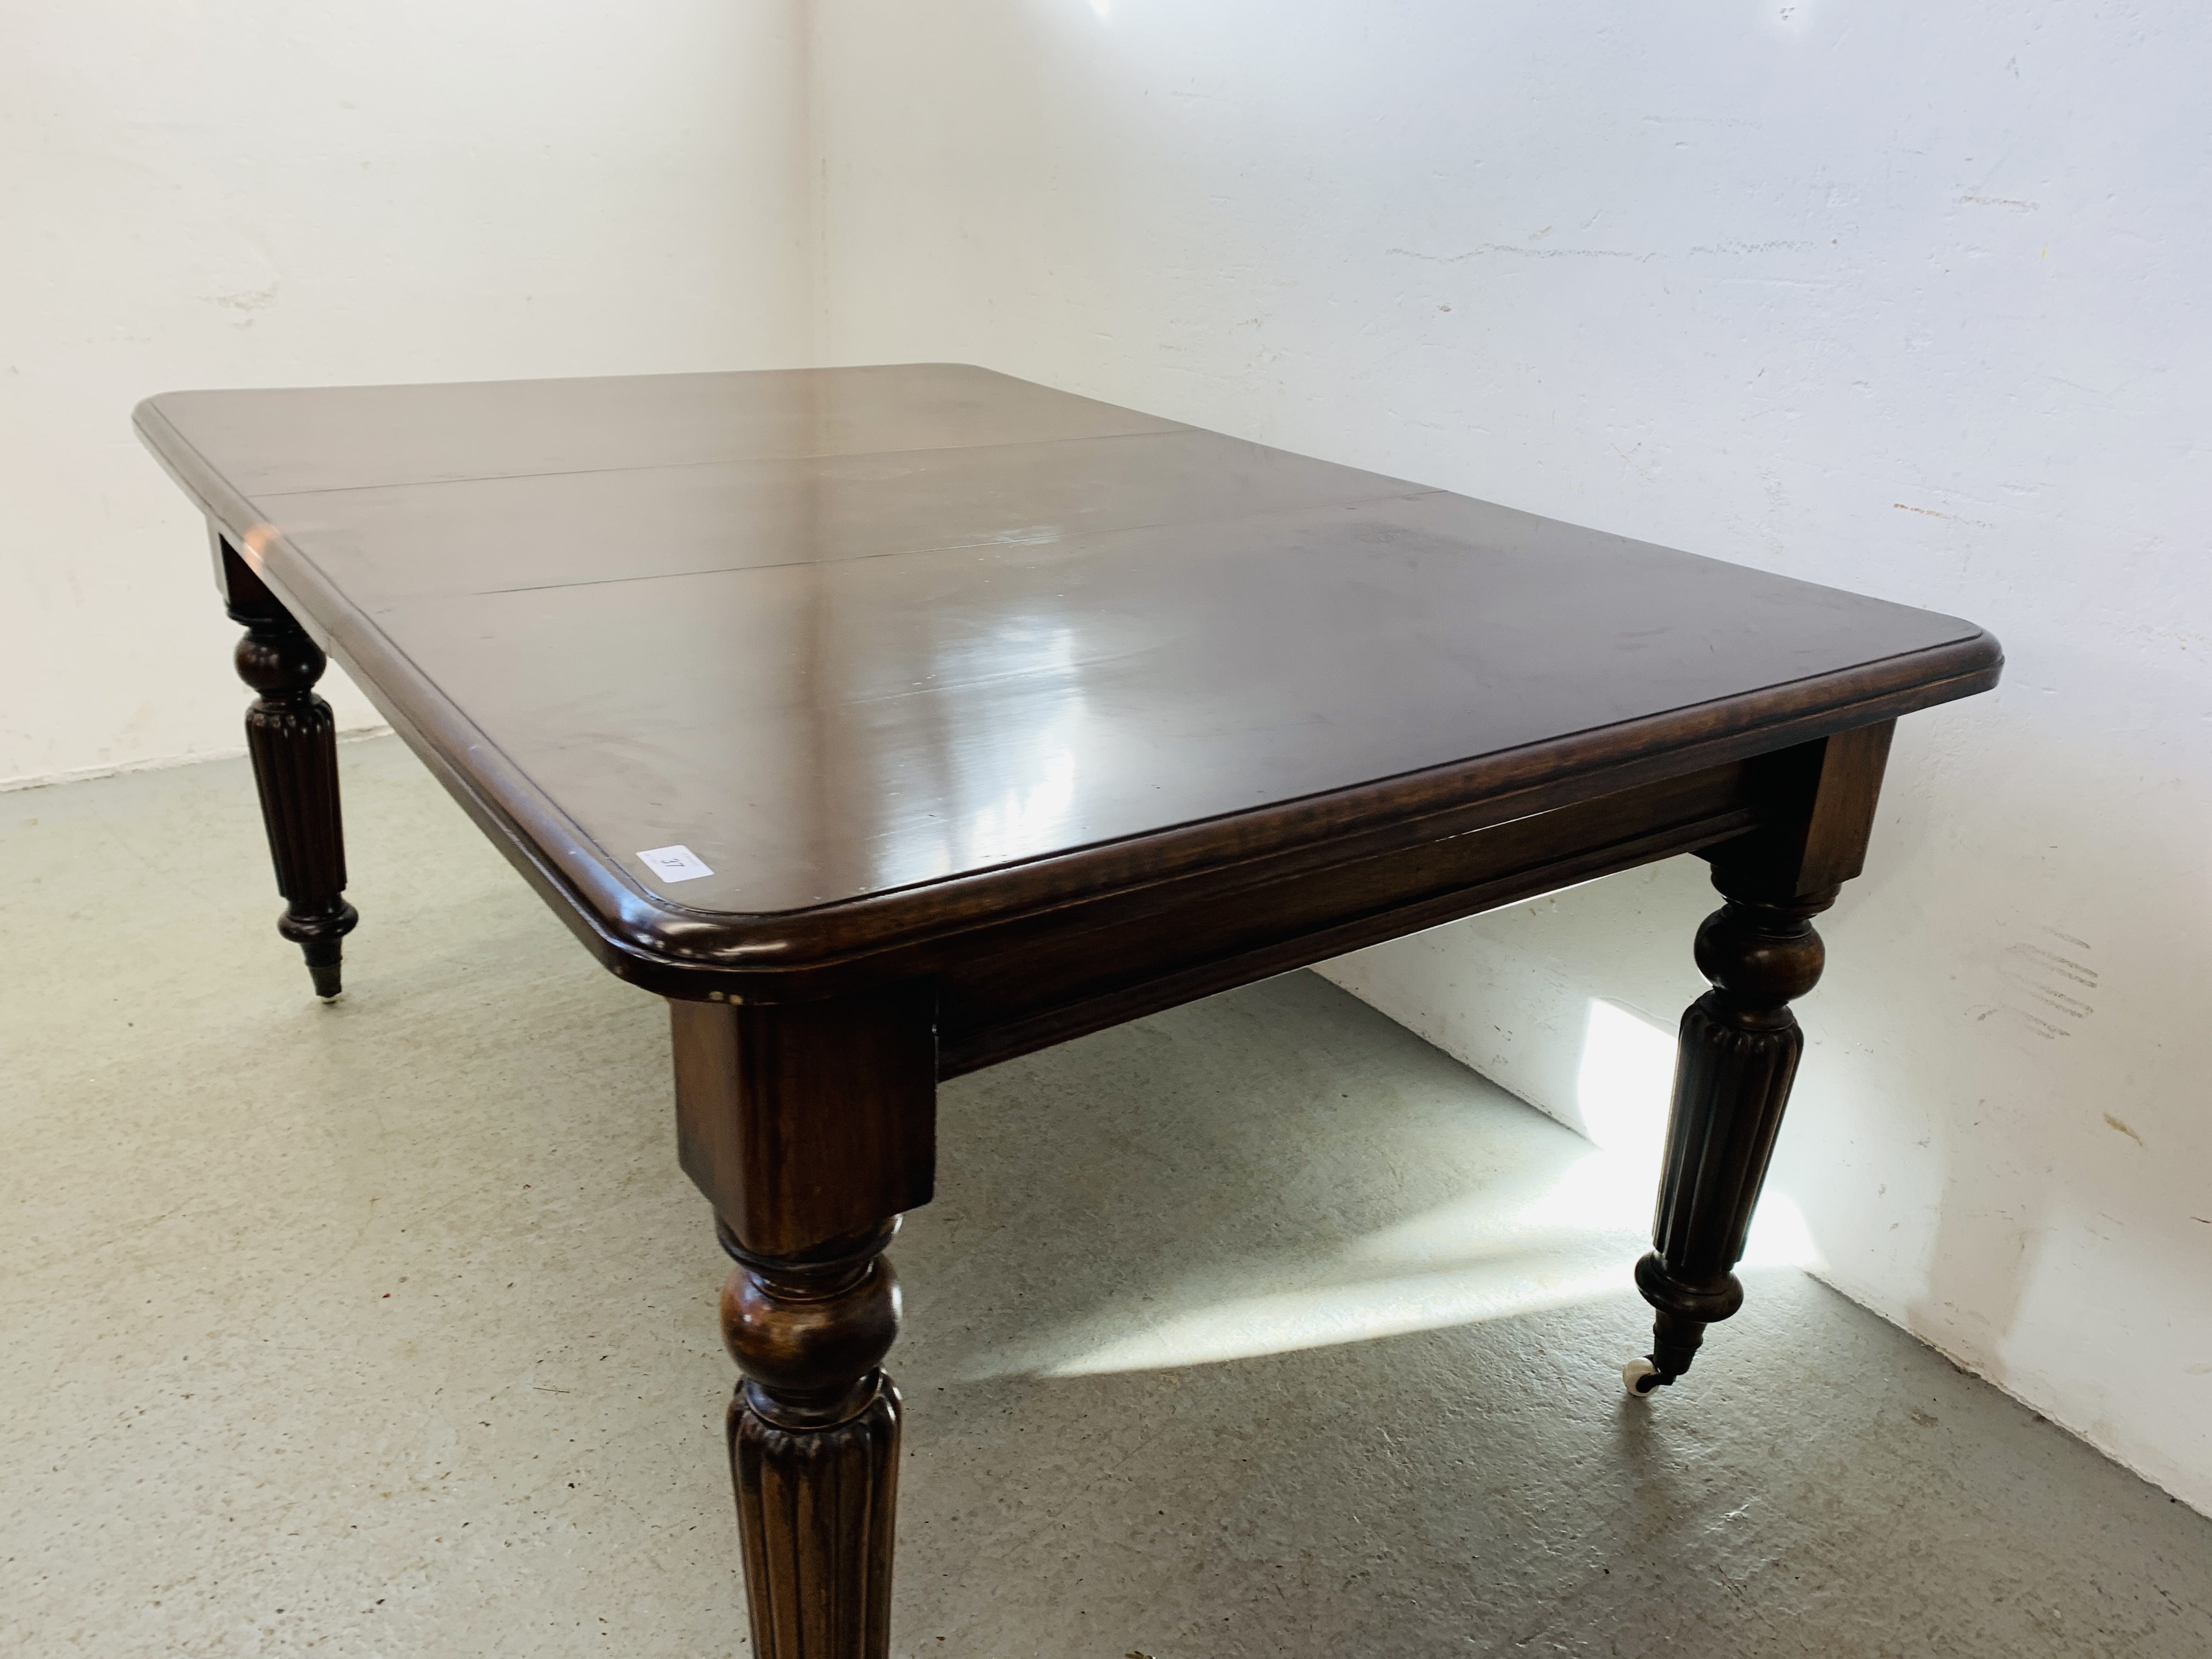 VICTORIAN MAHOGANY EXTENDING DINING TABLE, ON REEDED LEGS AND CERAMIC CASTORS (H 72CM, W 153CM, - Image 3 of 7